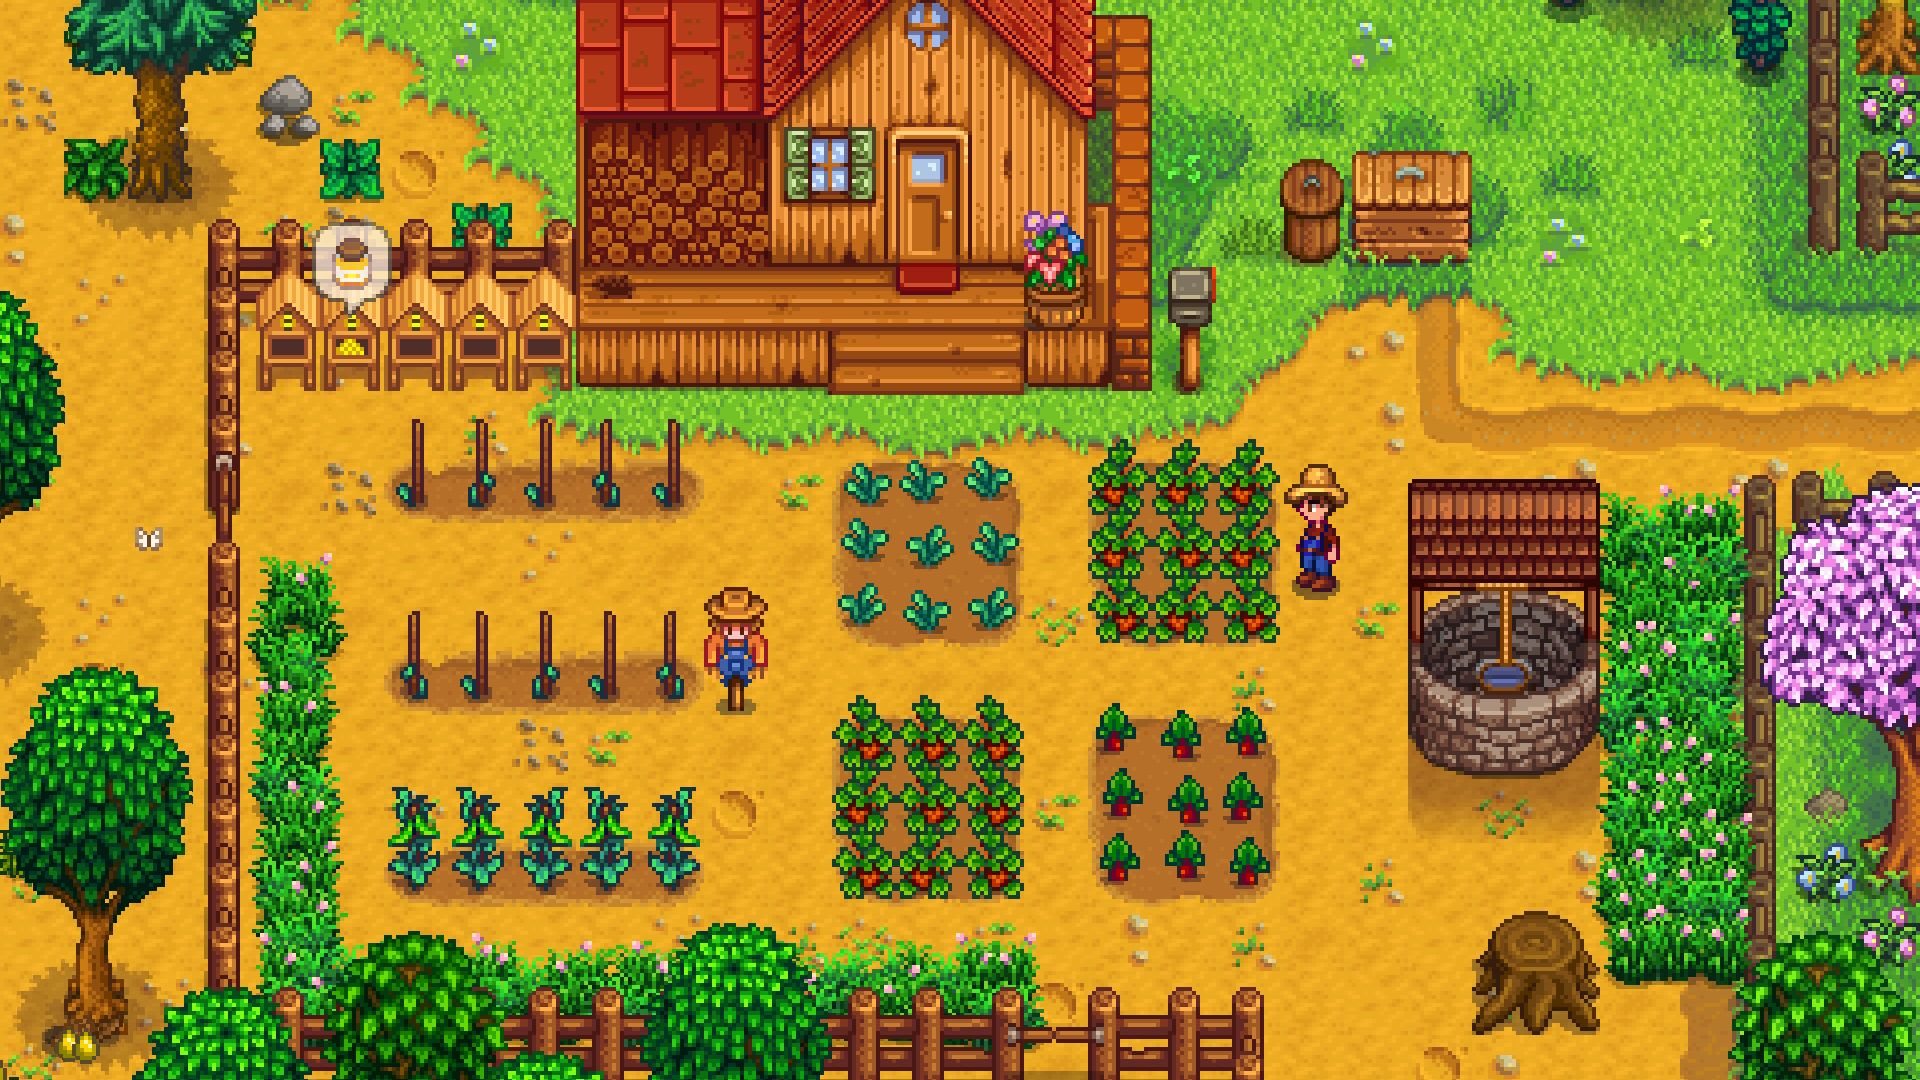 Stardew Valley mod expands Adventurer’s Guild with new romanceable NPCs and a friendly monster